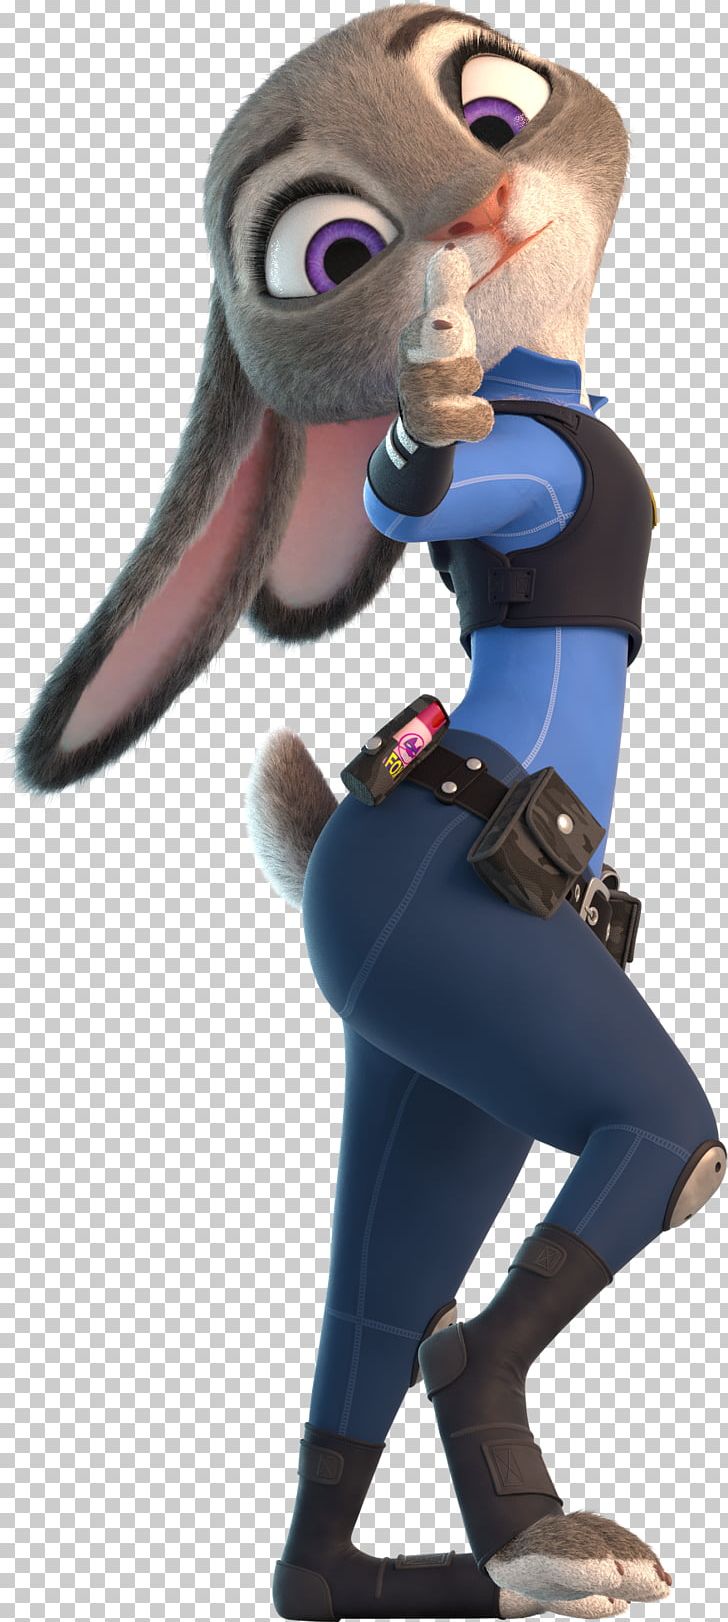 Lt. Judy Hopps Nick Wilde Finnick YouTube European Rabbit PNG, Clipart, Action Figure, Animation, Child, Costume, European Rabbit Free PNG Download